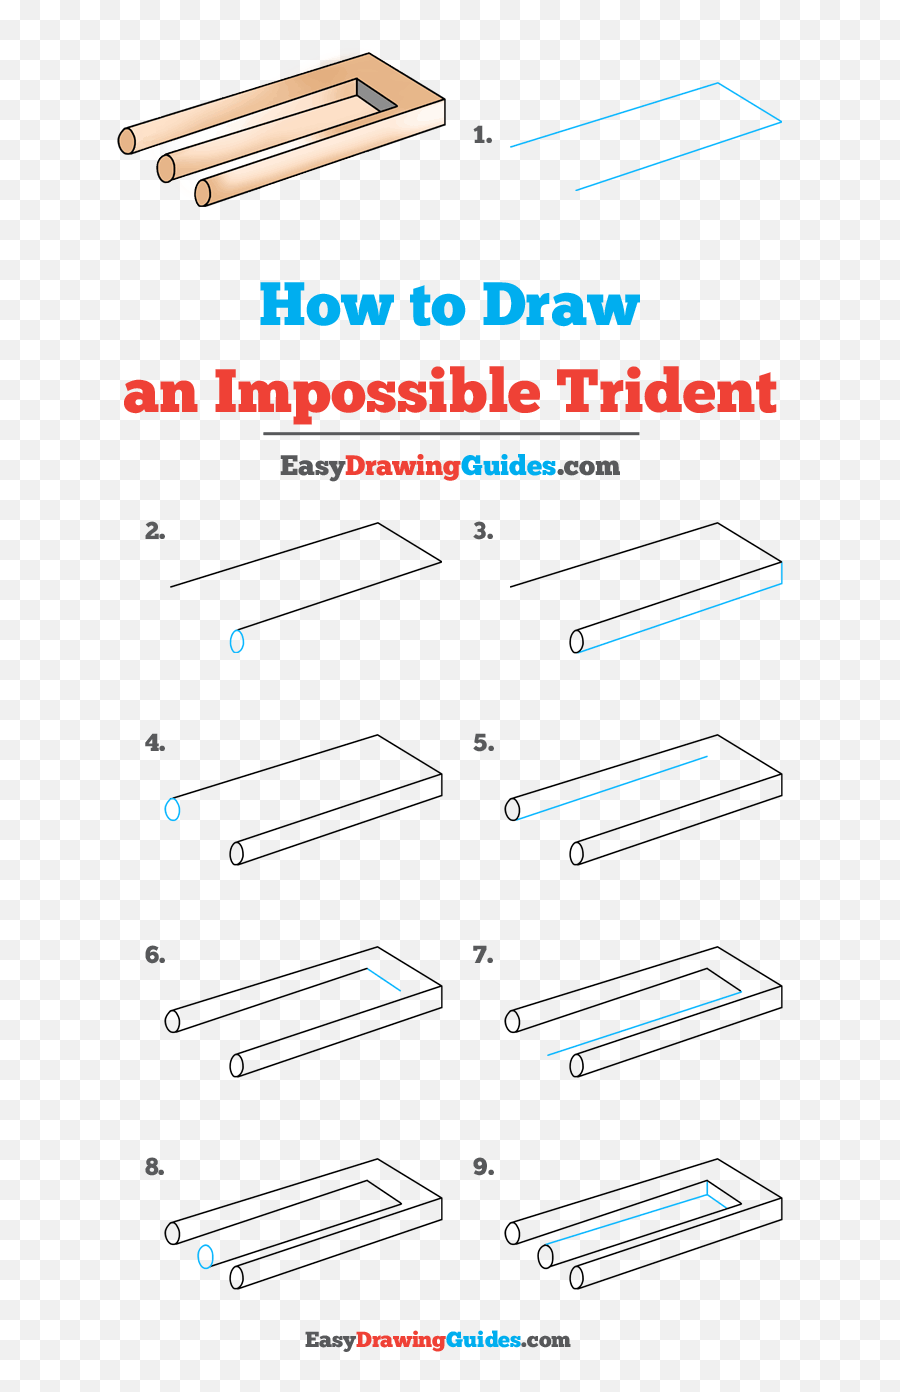 How To Draw An Impossible Trident - Droiders Emoji,Emoji Explanations